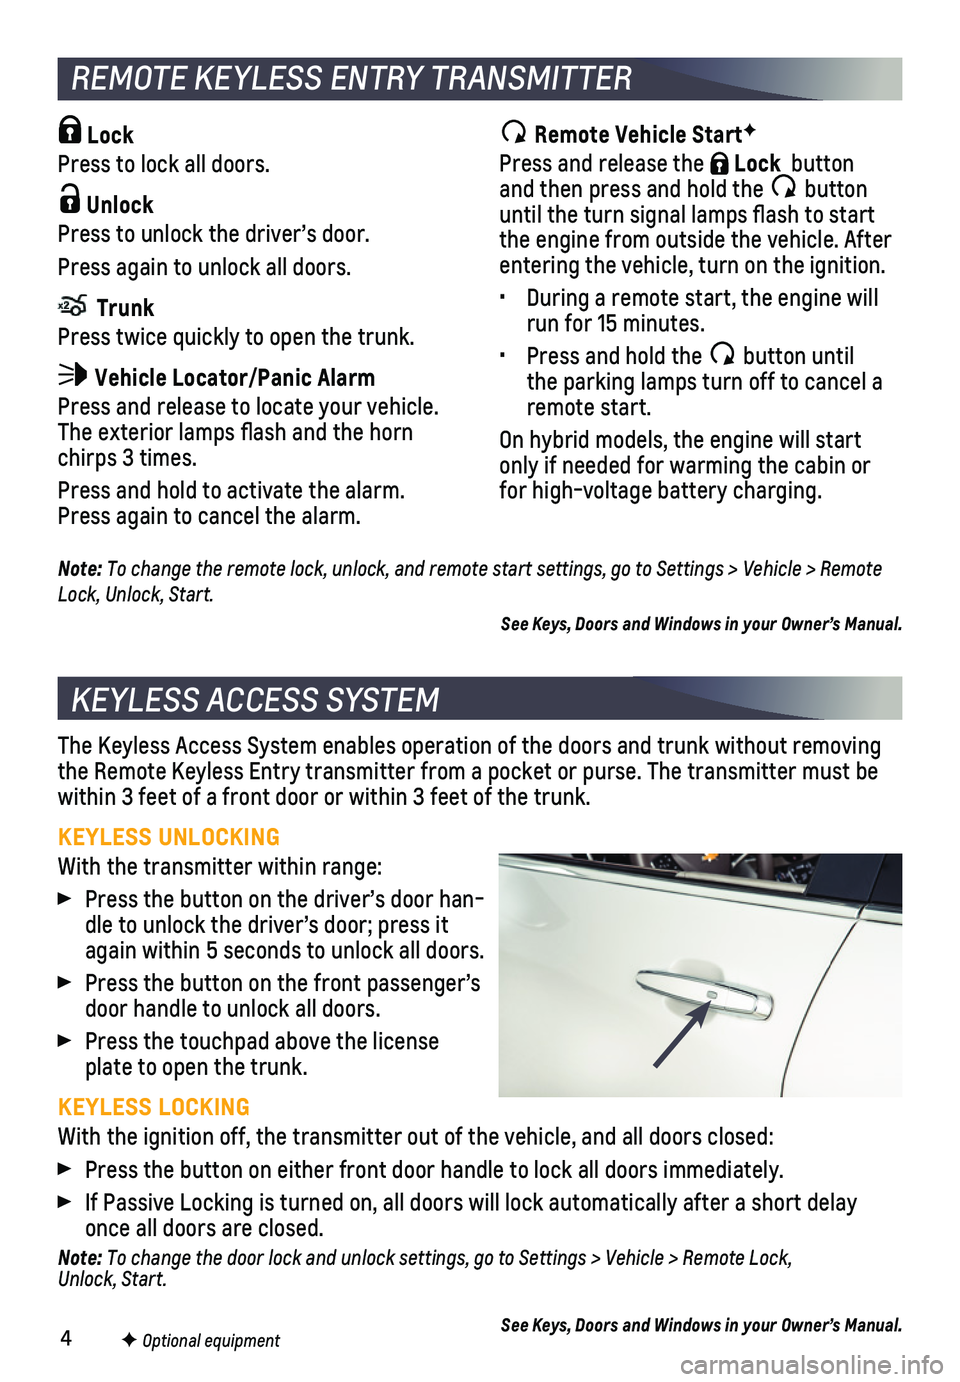 CHEVROLET MALIBU 2020  Get To Know Guide 4
KEYLESS ACCESS SYSTEM
The Keyless Access System enables operation of the doors and trunk witho\
ut removing the Remote Keyless Entry transmitter from a pocket or purse. The transmi\
tter must be wit